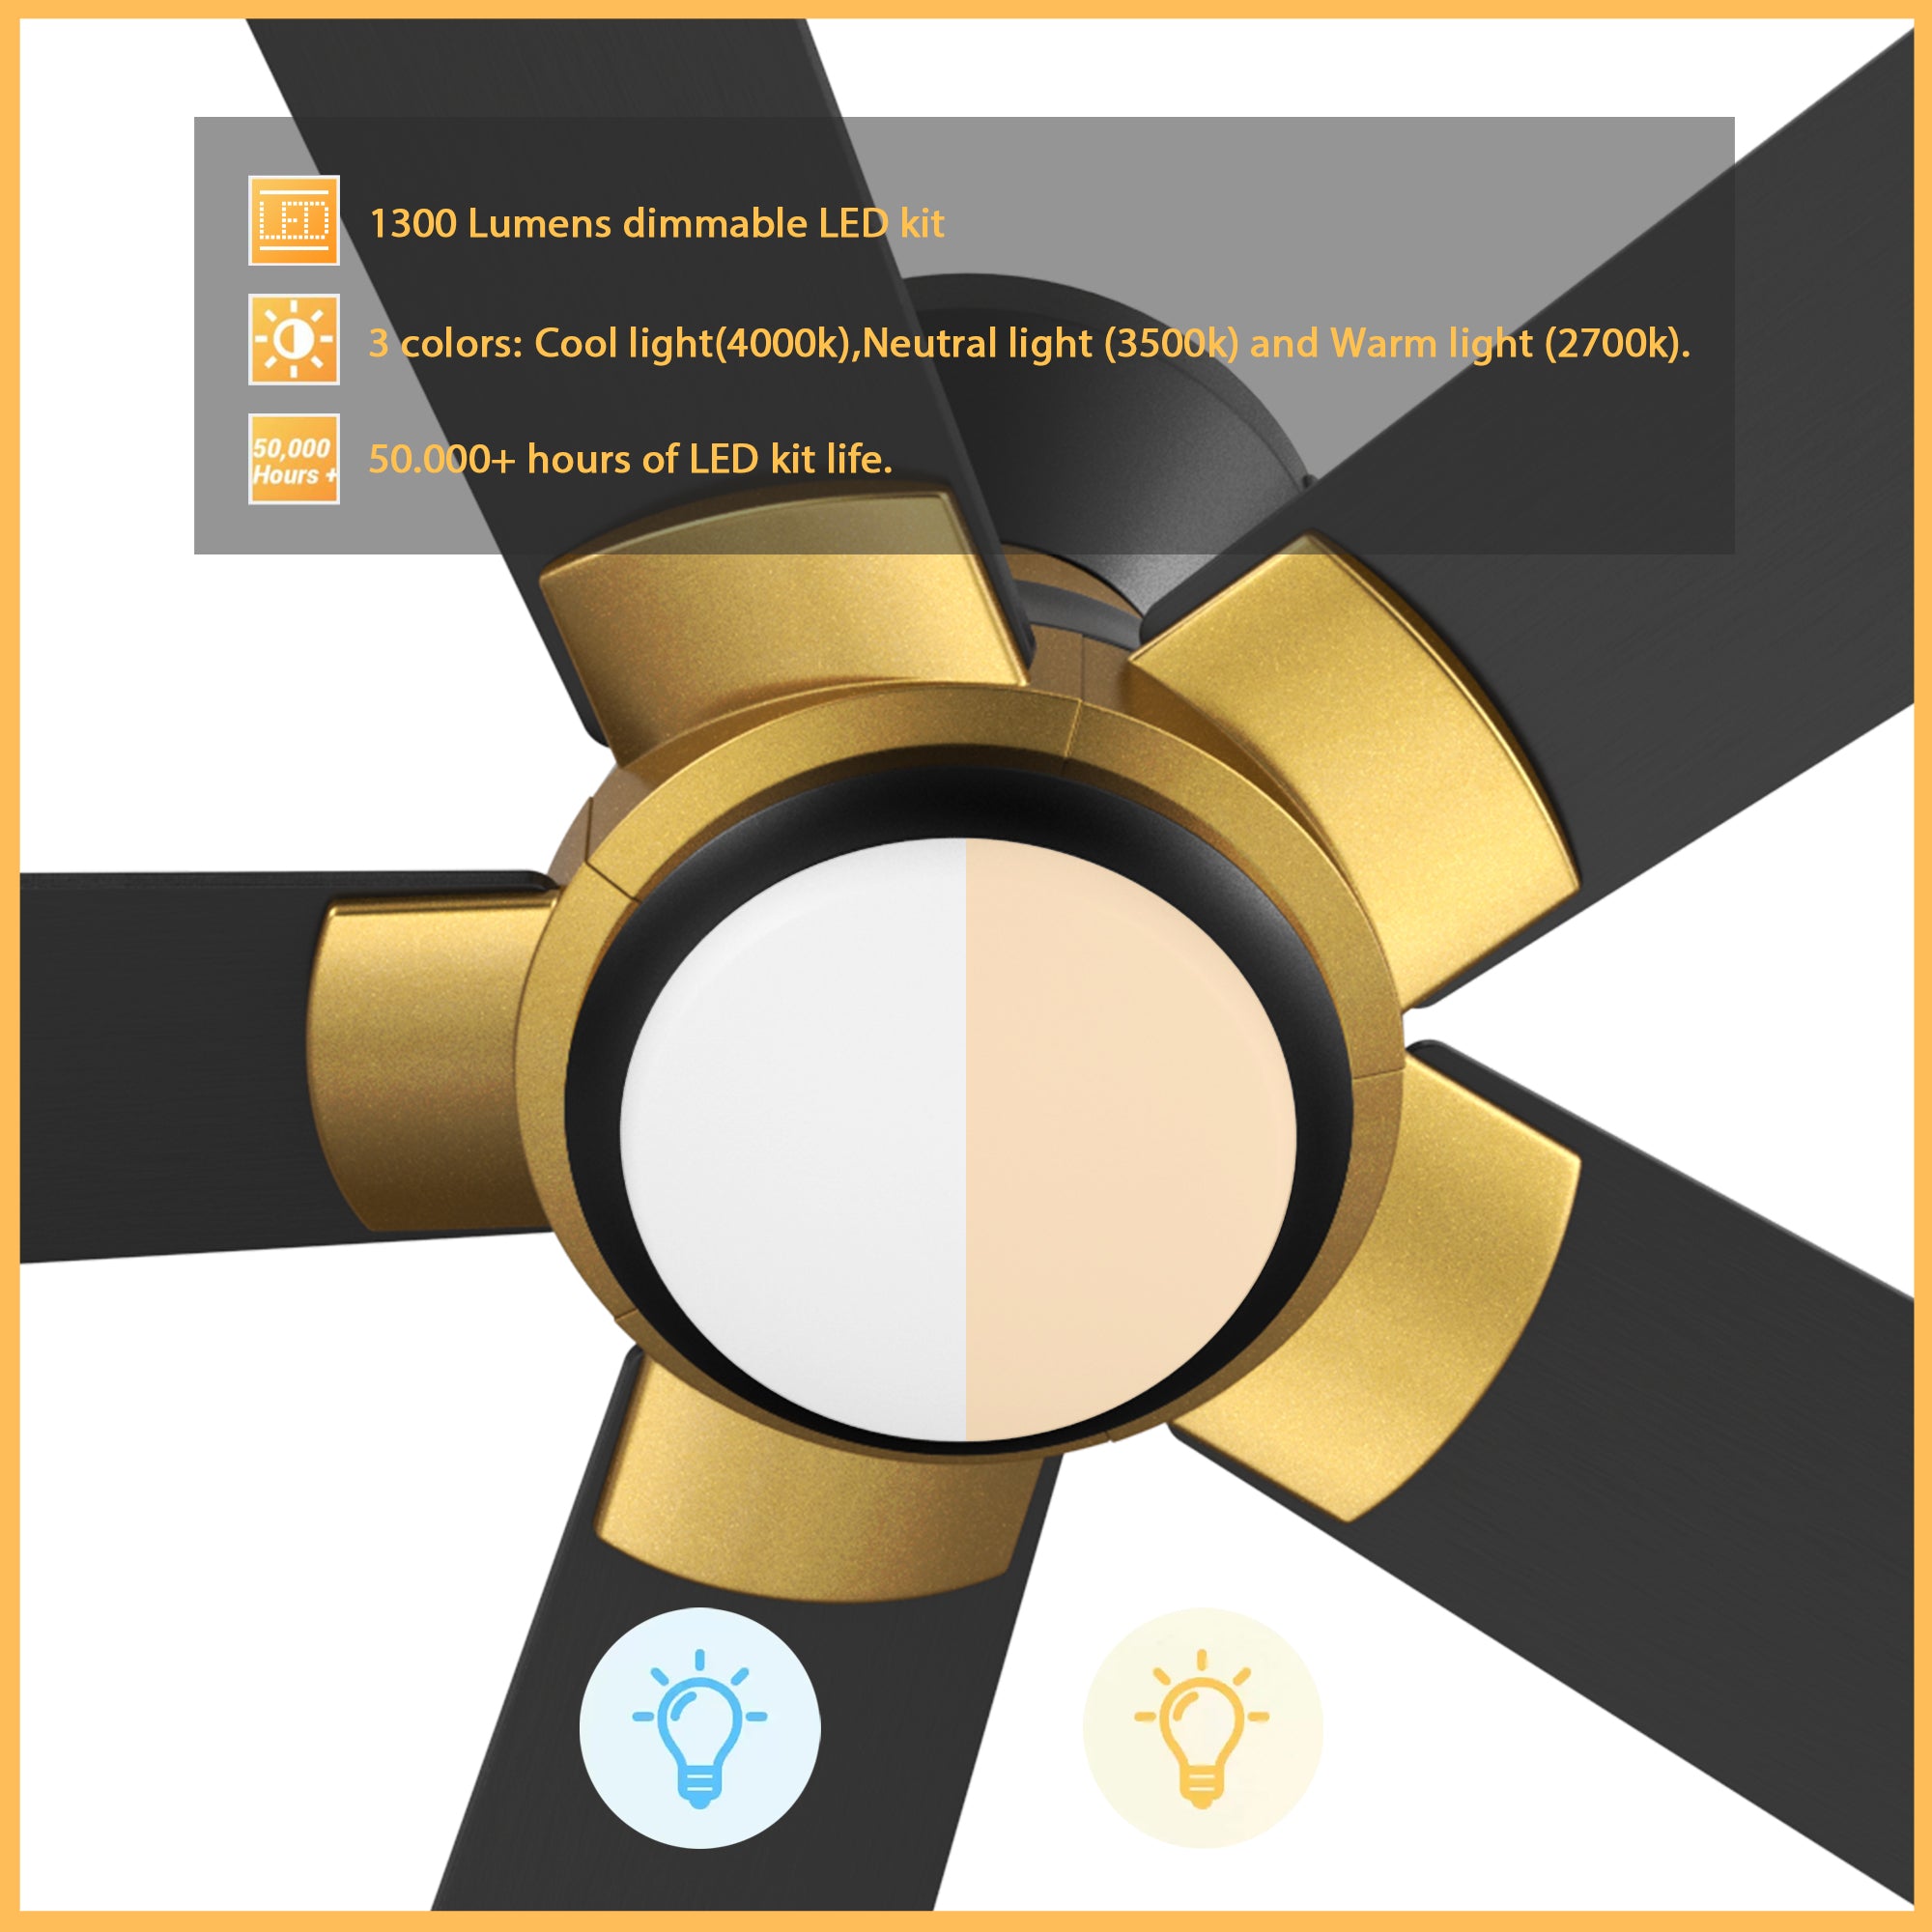 The Aspen flush mount fan features Remote control, Wi-Fi apps, Siri Shortcut and Voice control technology (compatible with Amazon Alexa and Google Home Assistant ) to set fan preferences. #color_black&gold